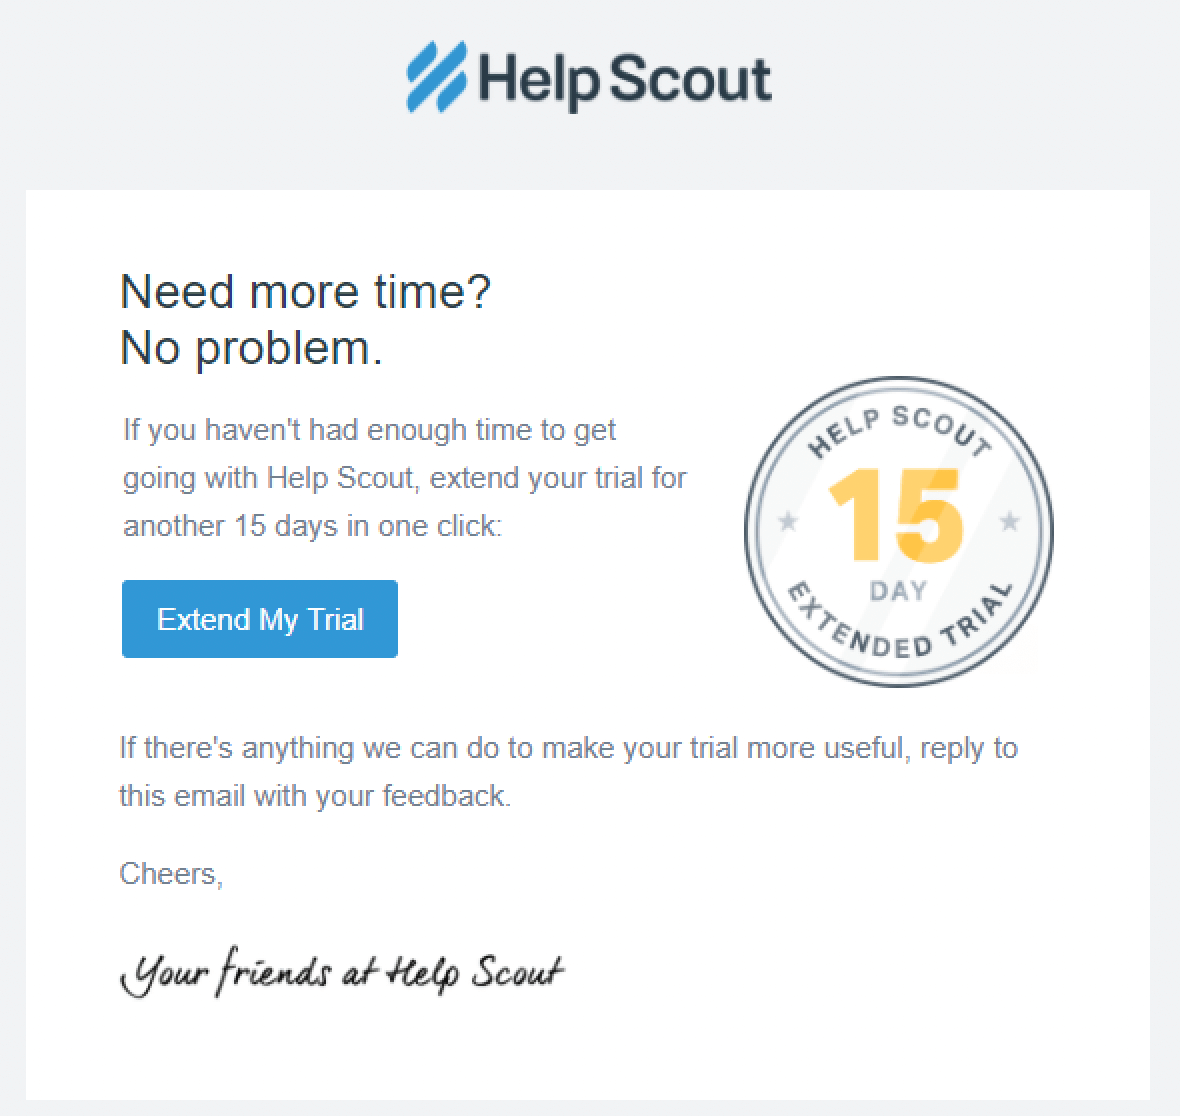 SaaS Re-engagement Emails: Screenshot of Help Scout's email